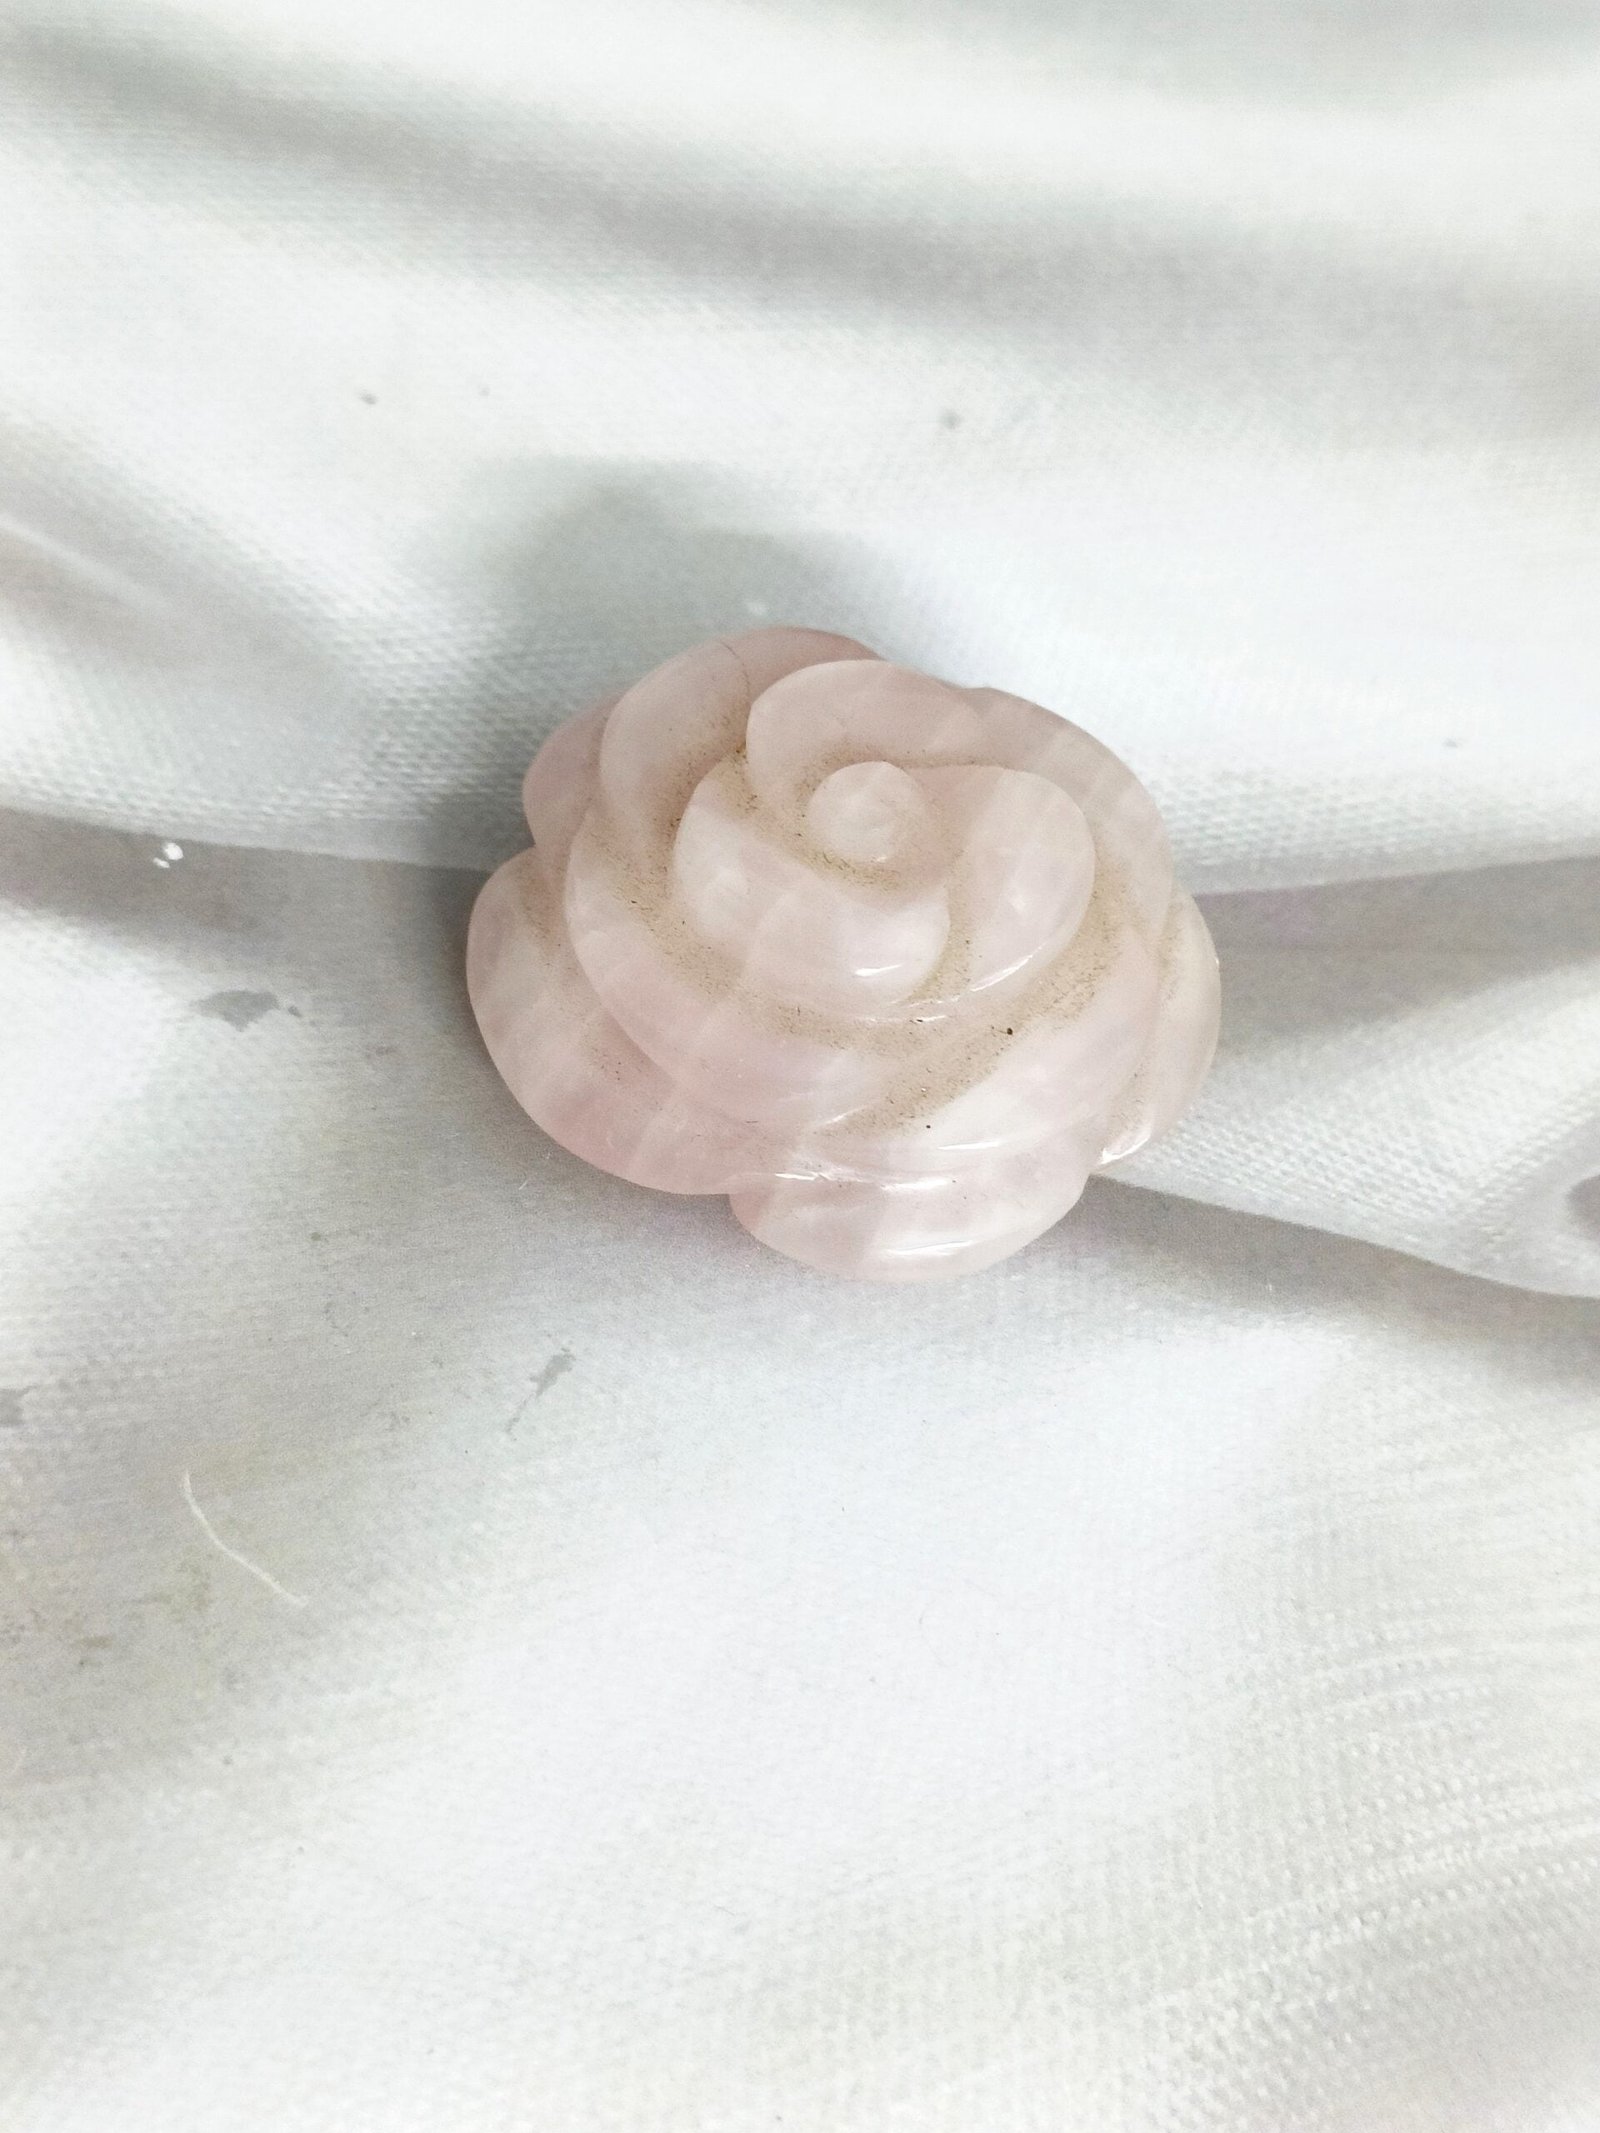 Rose Quartz Floral Figurine-2 Inches for love, Harmony, Relationships